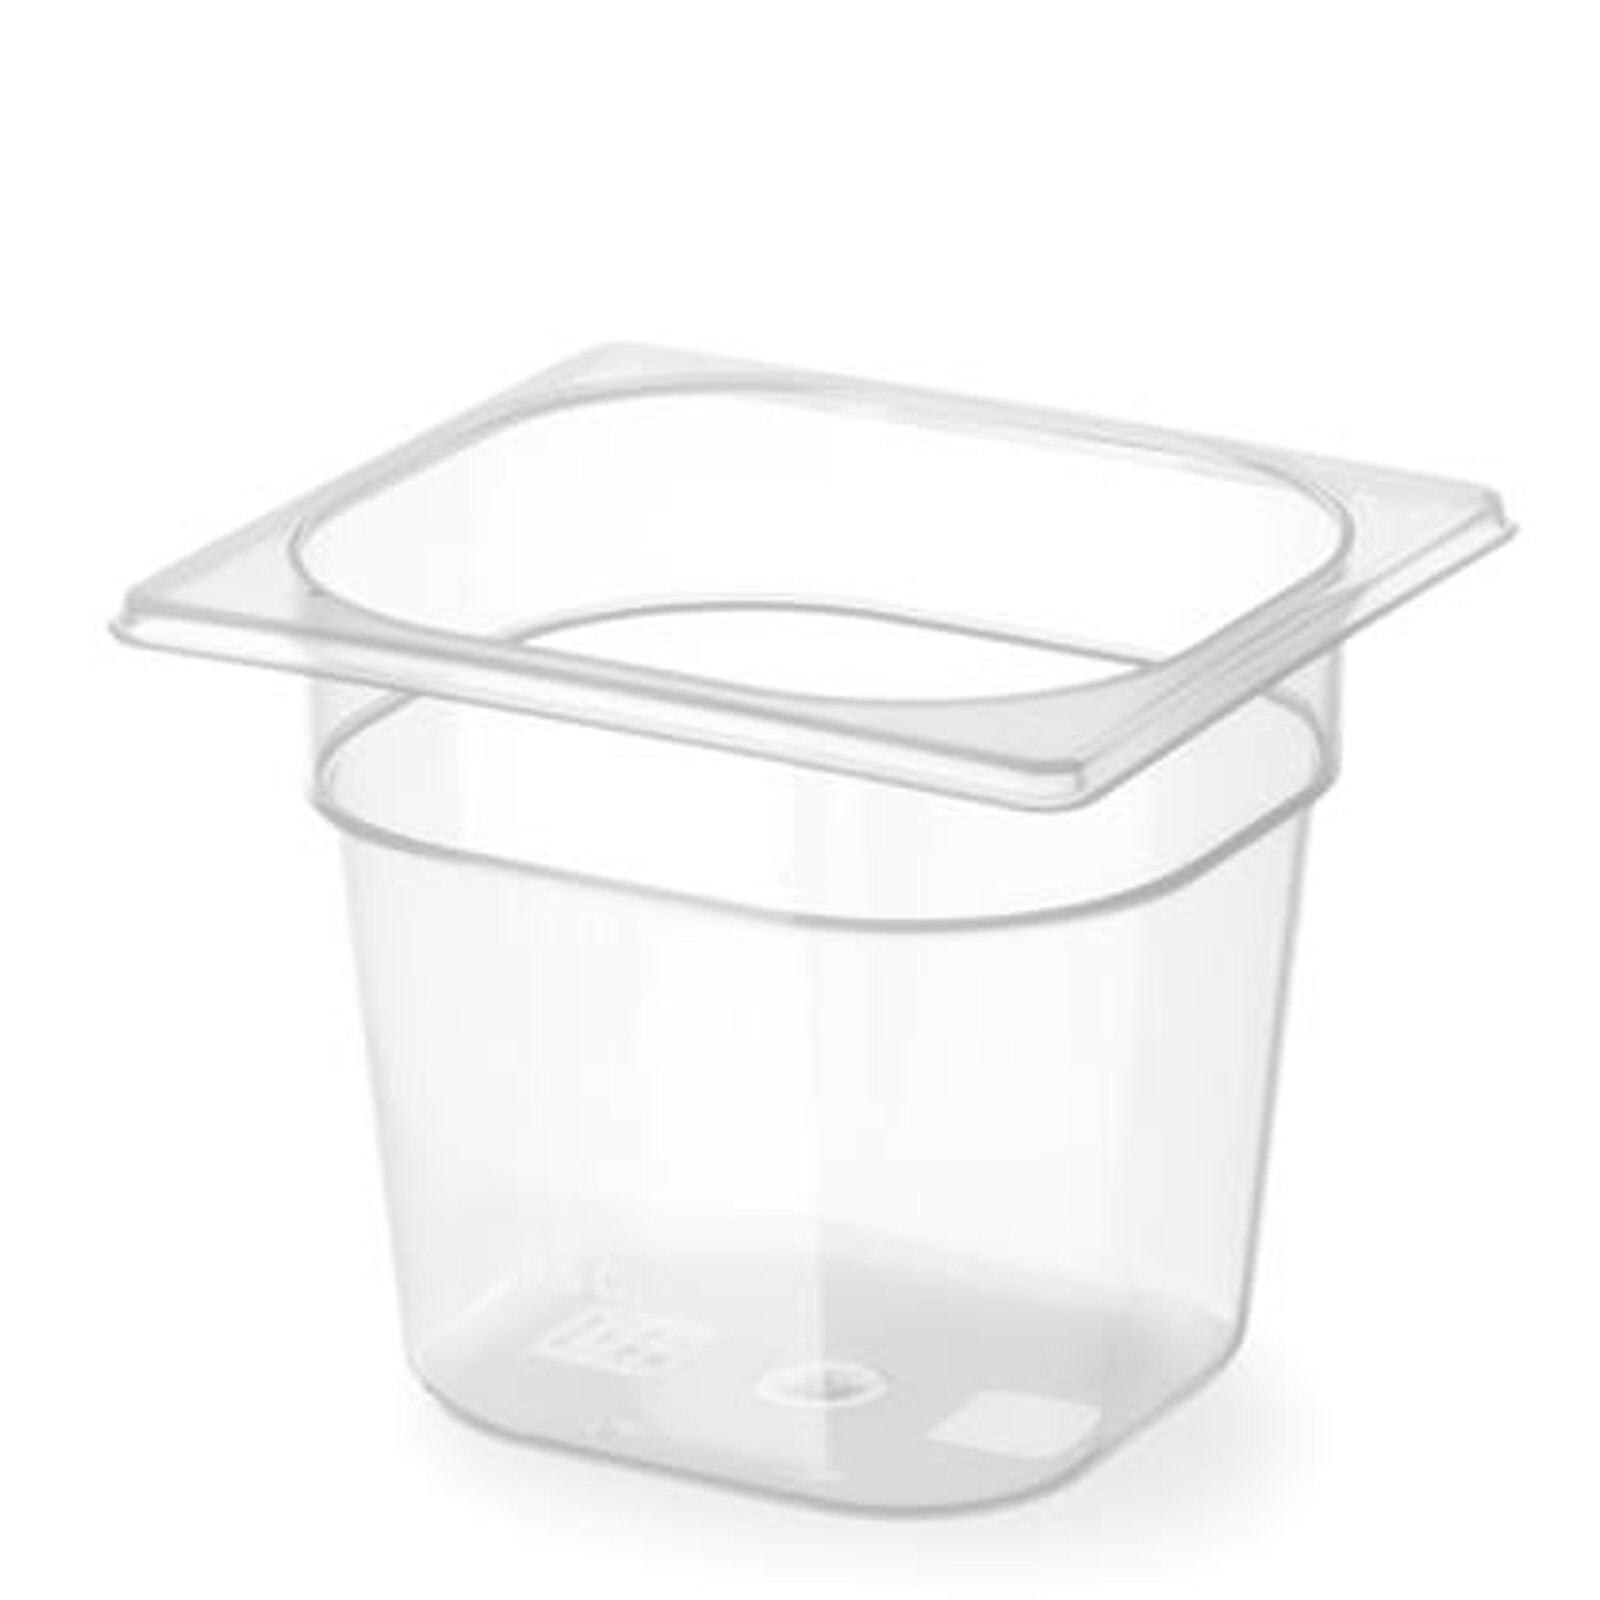 Gastronomy container made of polypropylene GN 1/6, height 100 mm - Hendi 880425